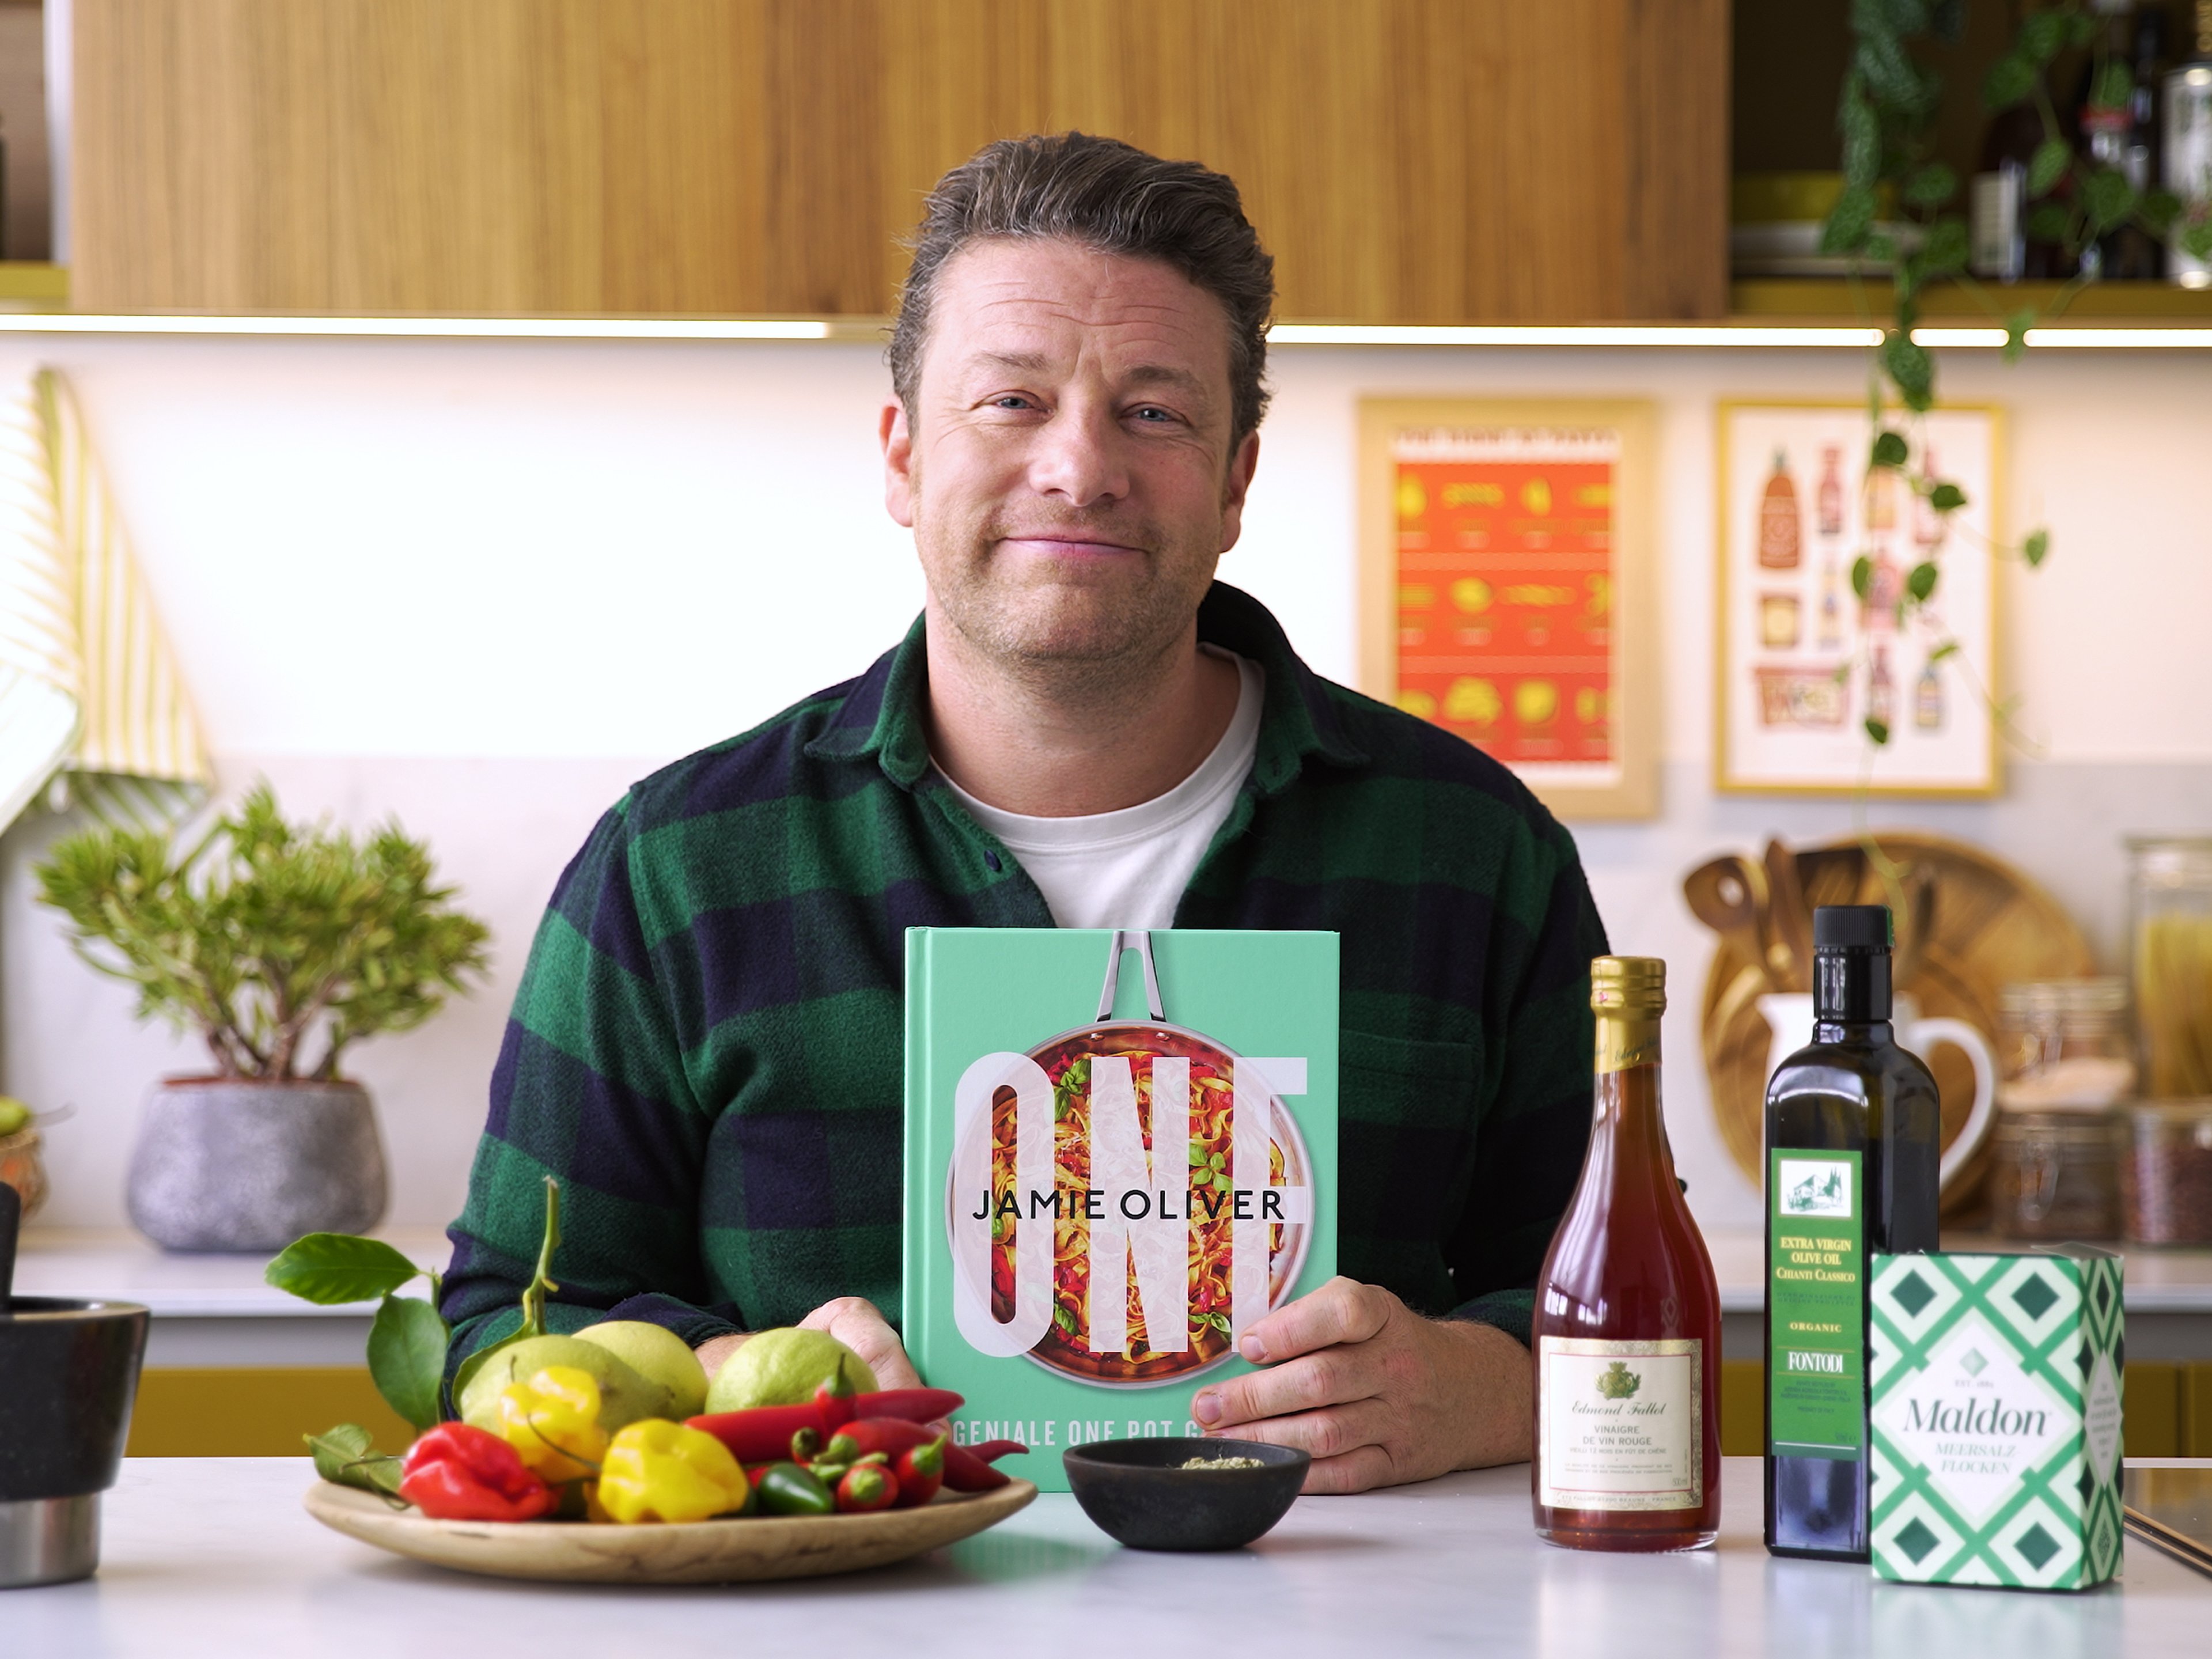 7 ingredients & tools Jamie Oliver can't live without